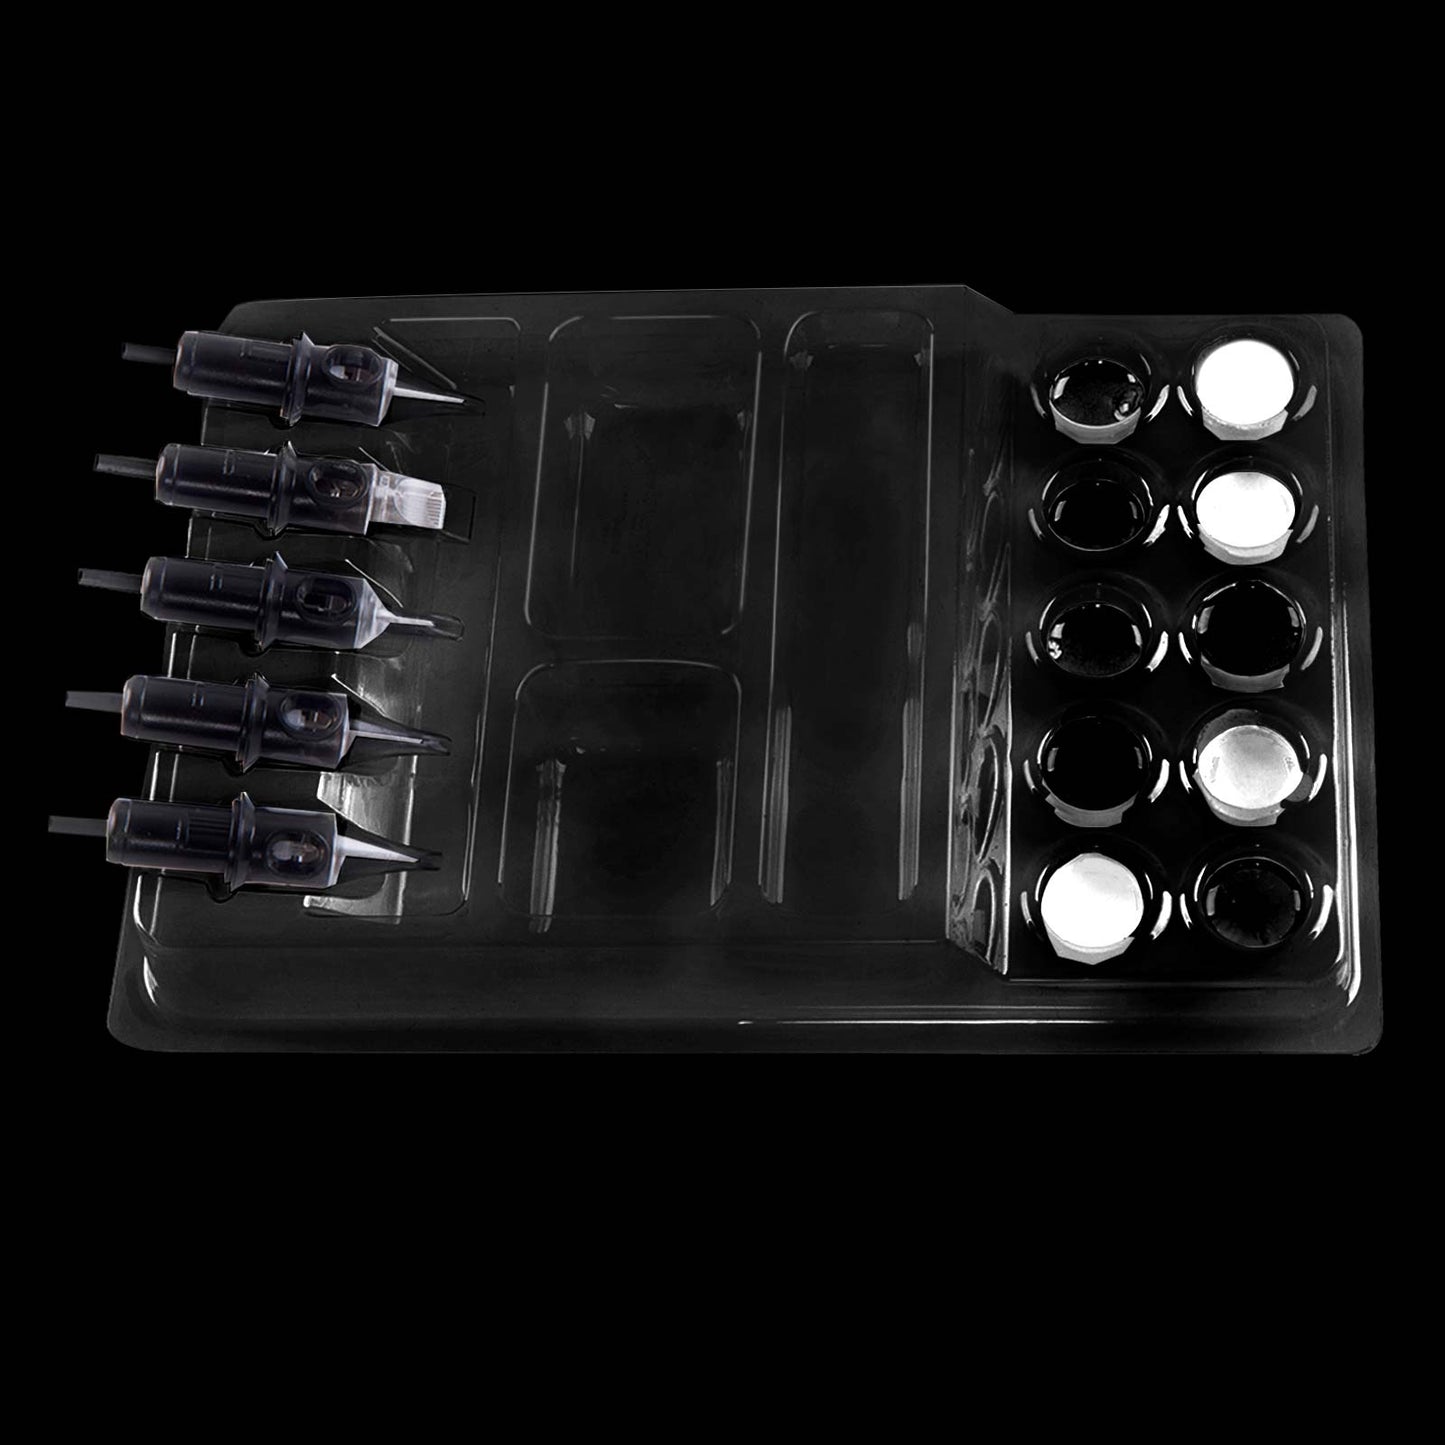 Disposable Tattoo Ink Tray for Black and Gray Tattoo 25 pcs/pack